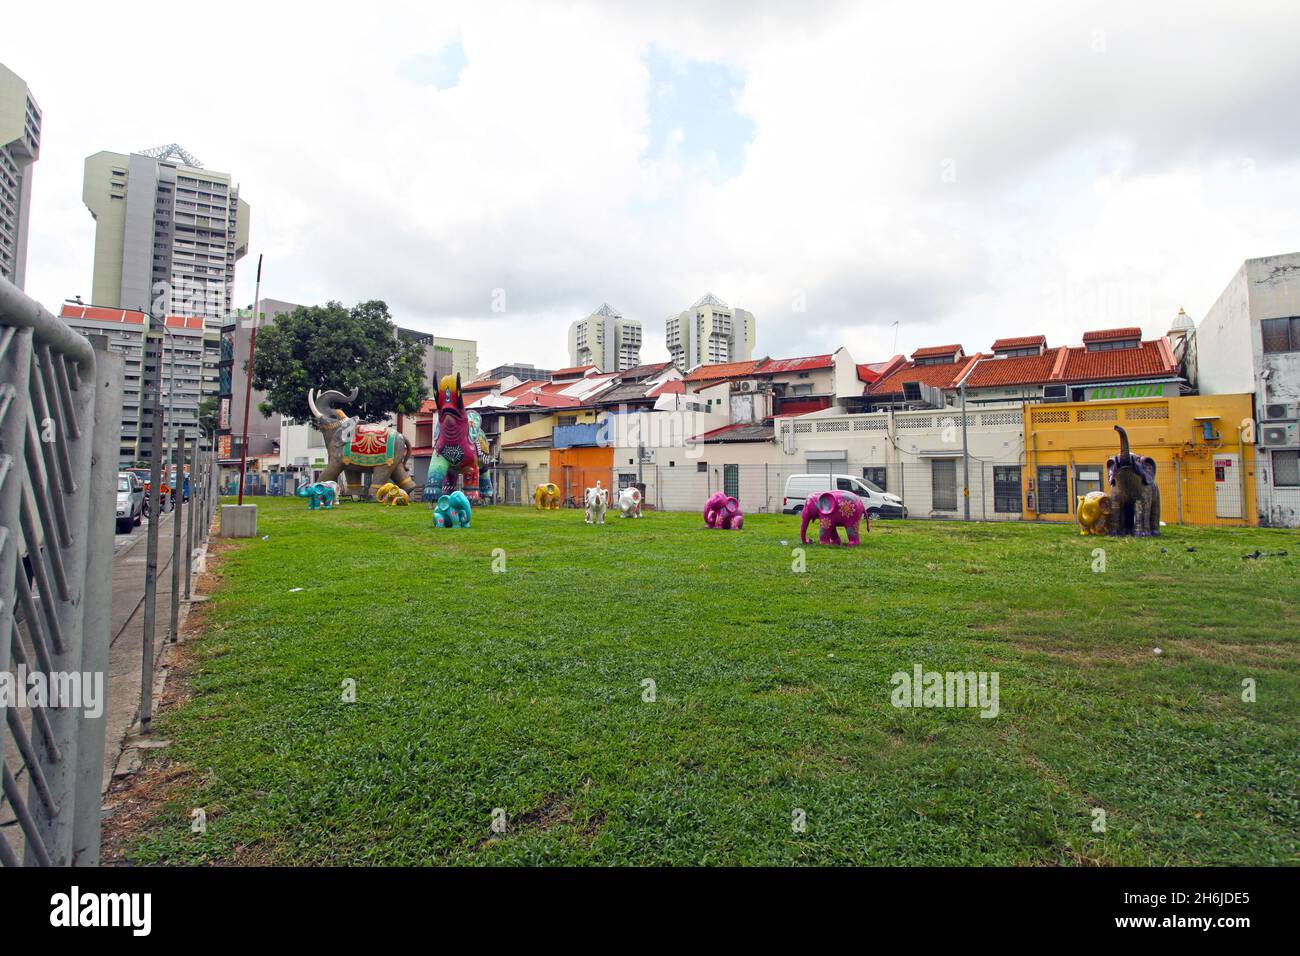 Small Open Park at Hindoo Road is a public park with colourful elephant sculptures in Little India, Singapore. Stock Photo